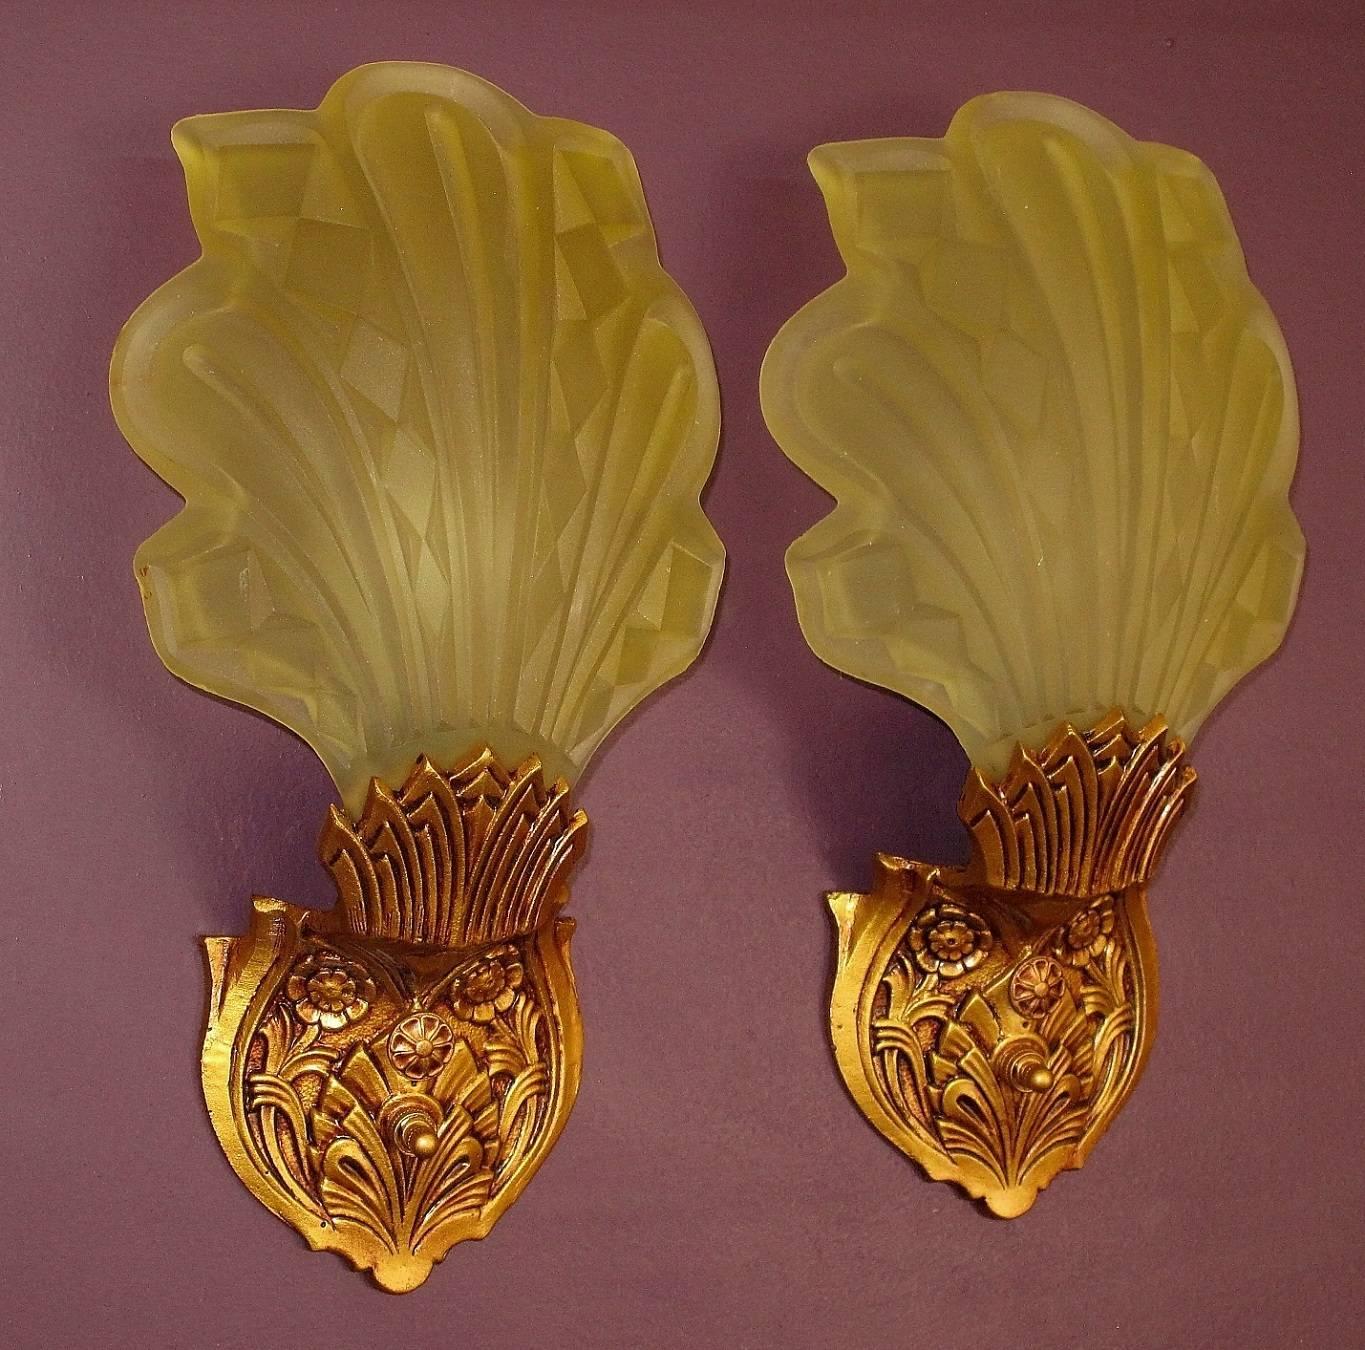 Rather rare and interesting pair of Art Deco era slip shade wall sconces. The designers here were able to capture the feeling of leaves blowing in the wind with the swept back and flowing nature of the shades which seem to grow out of the shade